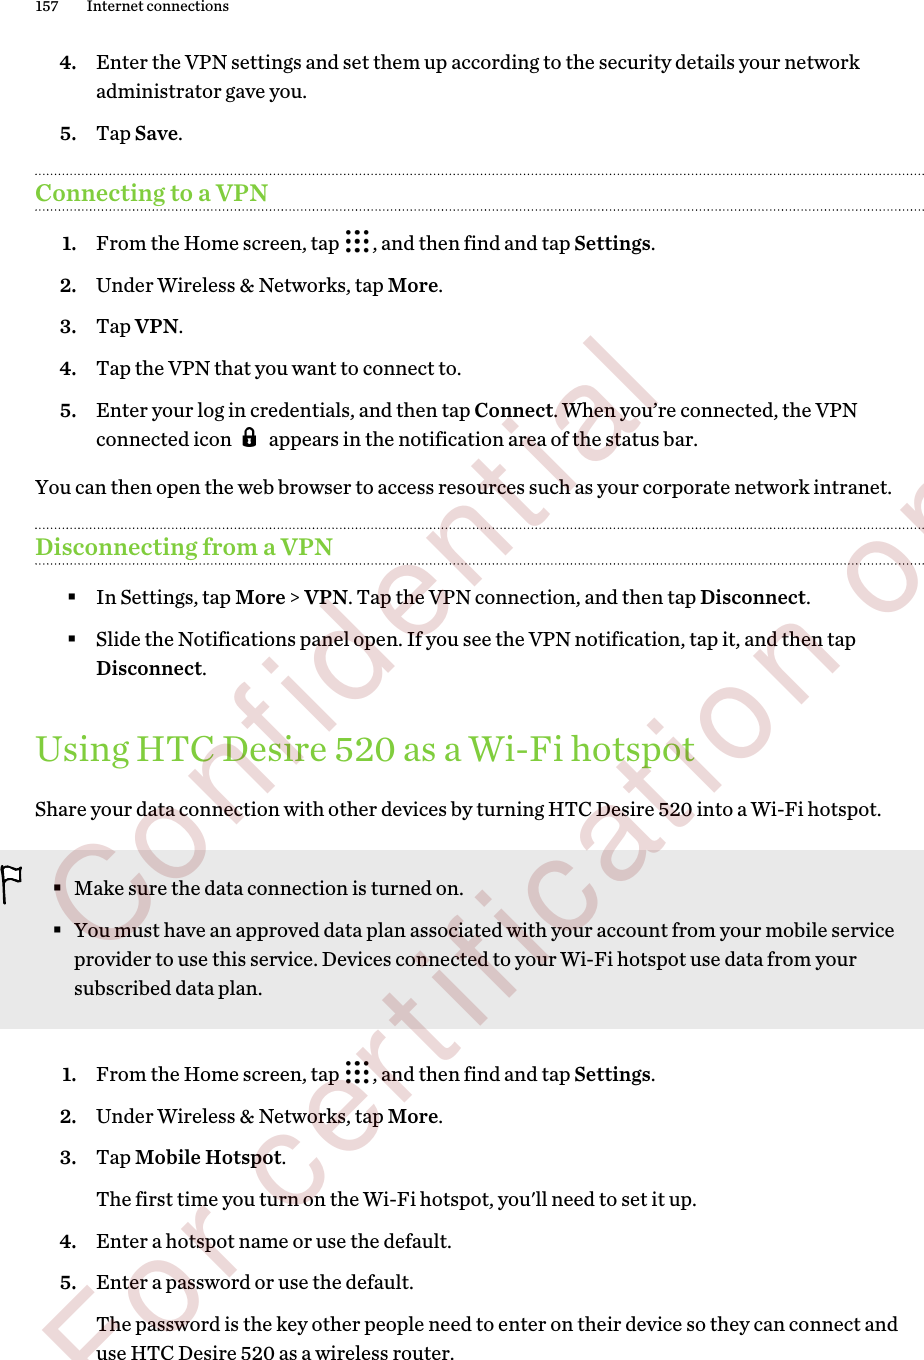 4. Enter the VPN settings and set them up according to the security details your networkadministrator gave you.5. Tap Save.Connecting to a VPN1. From the Home screen, tap  , and then find and tap Settings.2. Under Wireless &amp; Networks, tap More.3. Tap VPN.4. Tap the VPN that you want to connect to.5. Enter your log in credentials, and then tap Connect. When you’re connected, the VPNconnected icon   appears in the notification area of the status bar.You can then open the web browser to access resources such as your corporate network intranet.Disconnecting from a VPN§In Settings, tap More &gt; VPN. Tap the VPN connection, and then tap Disconnect.§Slide the Notifications panel open. If you see the VPN notification, tap it, and then tapDisconnect.Using HTC Desire 520 as a Wi-Fi hotspotShare your data connection with other devices by turning HTC Desire 520 into a Wi-Fi hotspot.§Make sure the data connection is turned on.§You must have an approved data plan associated with your account from your mobile serviceprovider to use this service. Devices connected to your Wi-Fi hotspot use data from yoursubscribed data plan.1. From the Home screen, tap  , and then find and tap Settings.2. Under Wireless &amp; Networks, tap More.3. Tap Mobile Hotspot. The first time you turn on the Wi-Fi hotspot, you&apos;ll need to set it up.4. Enter a hotspot name or use the default.5. Enter a password or use the default. The password is the key other people need to enter on their device so they can connect anduse HTC Desire 520 as a wireless router.157 Internet connections        Confidential  For certification only